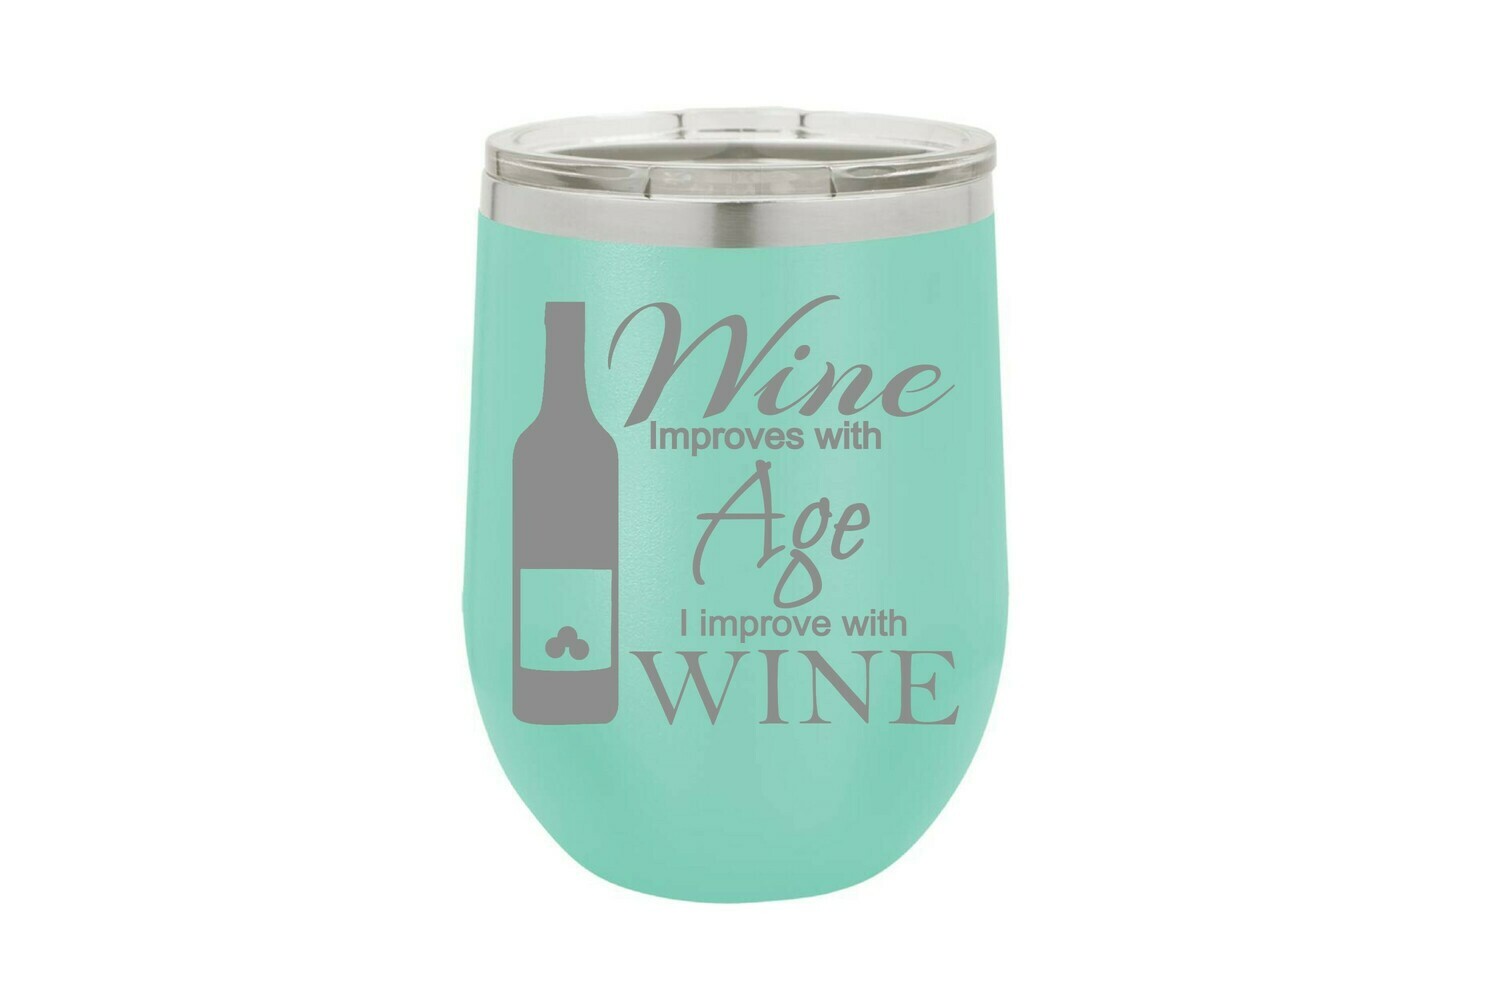 Wine Improves with Age I improve with WINE Insulated Tumbler 12 oz